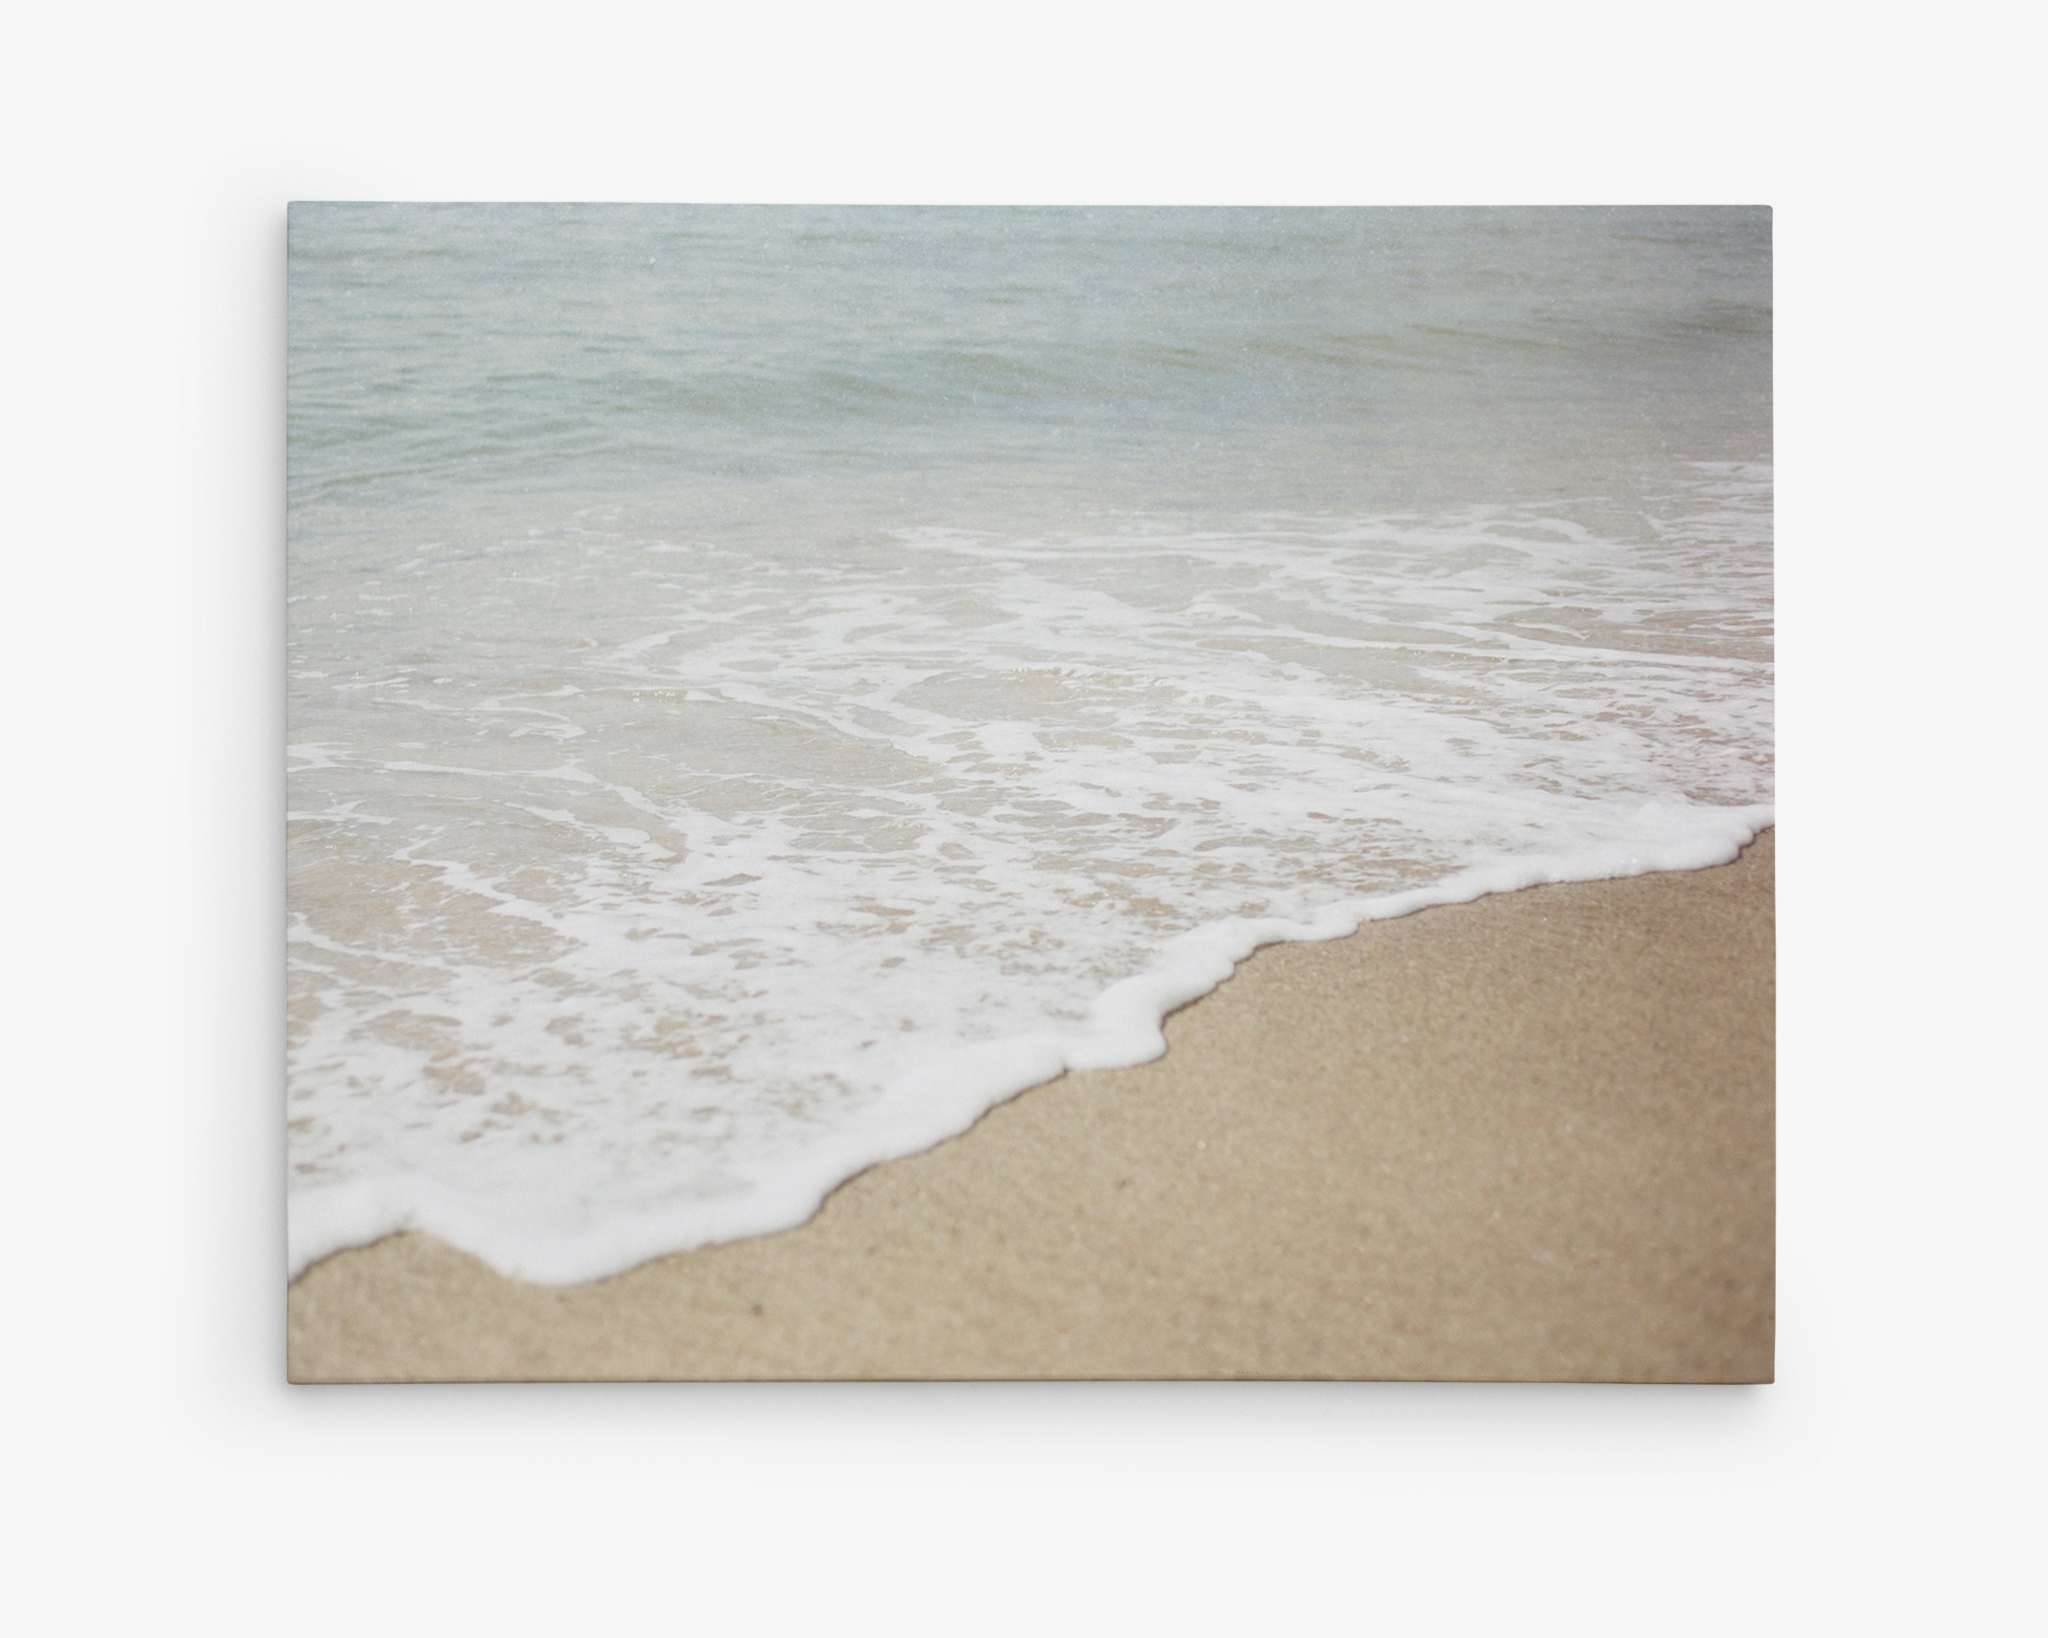 A serene beach scene of Will Rogers State Beach shows gentle waves lapping onto a sandy shore. The foam from the waves creates a white, frothy edge as it meets the beige sand, capturing a peaceful, coastal atmosphere. This image is available as Offley Green&#39;s premium artist-grade Beach Waves Canvas Wall Art, &#39;Chasing Surf,&#39; with a gallery wrap finish.
